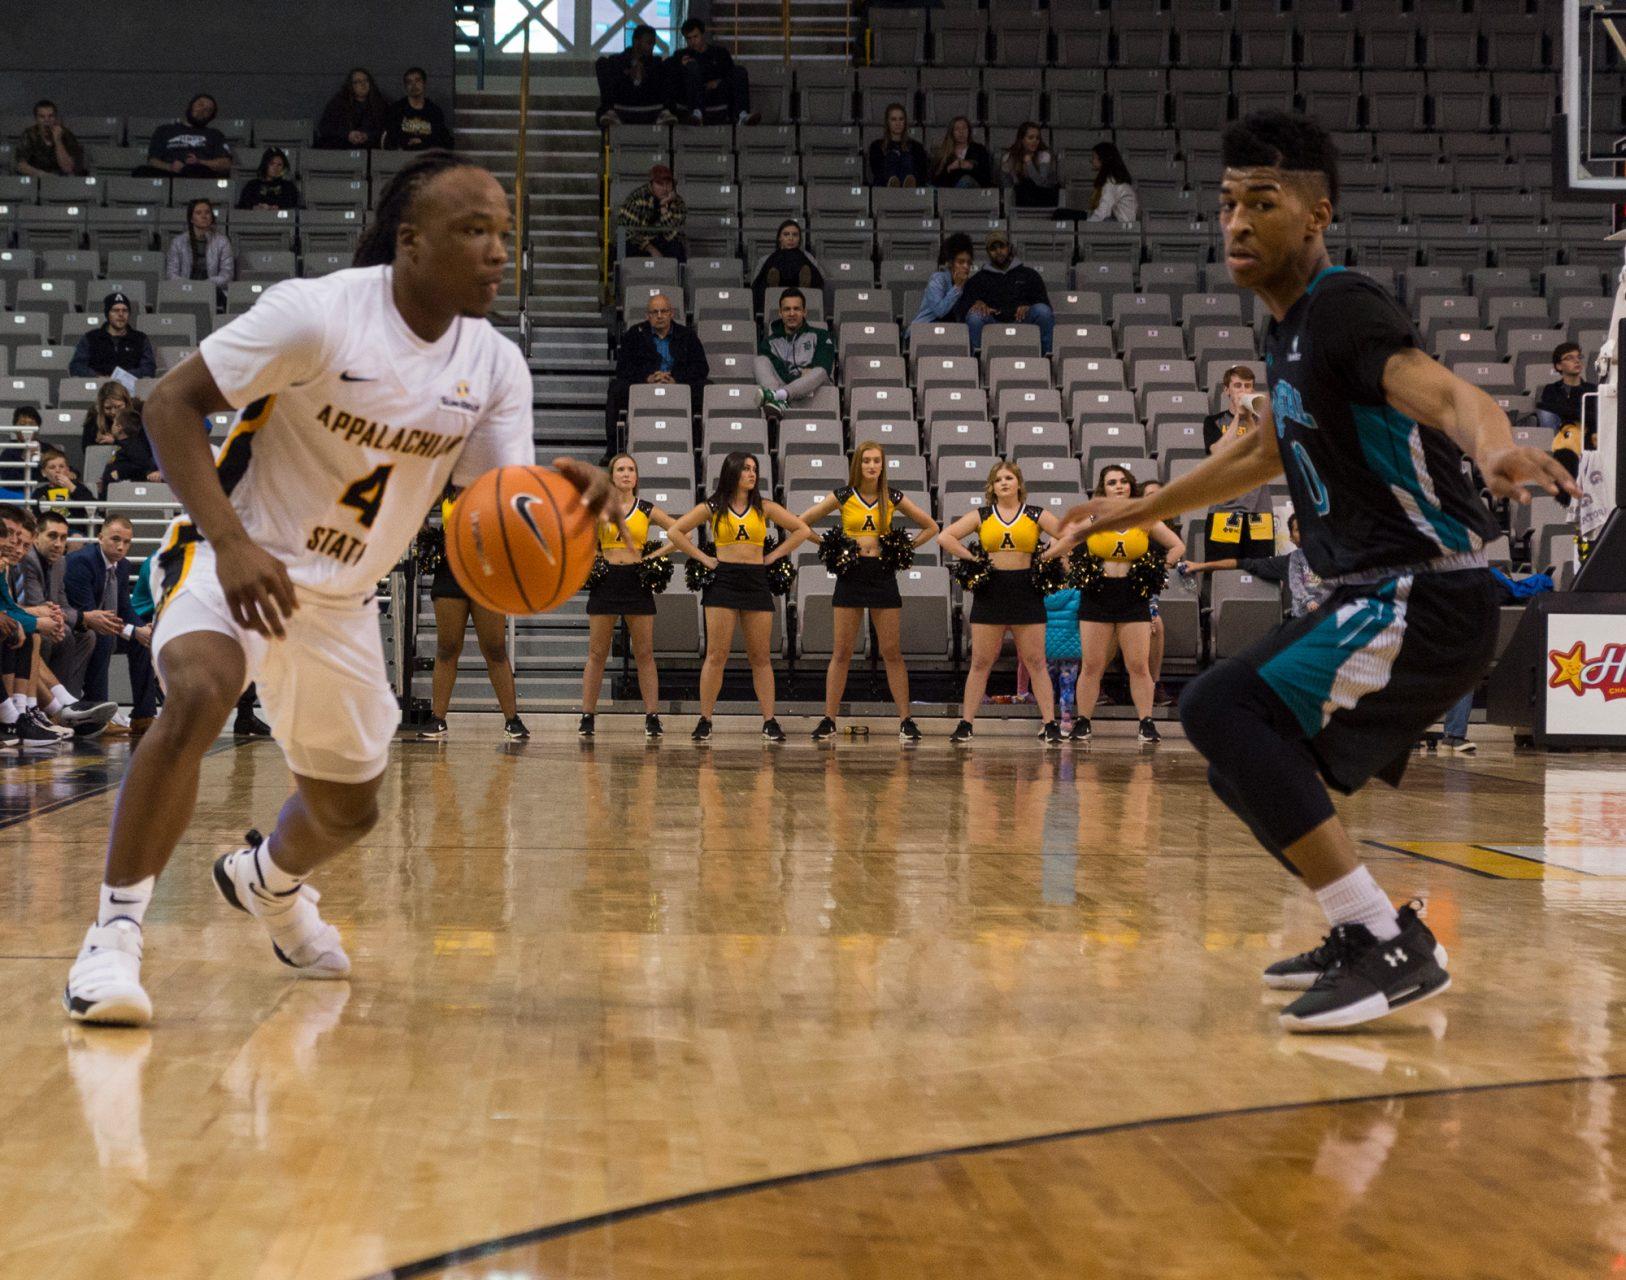 Sophomore guard O'Showen Williams checks with teammates before passing the ball during the game against Coastal Carolina on Saturday, March 3rd. 